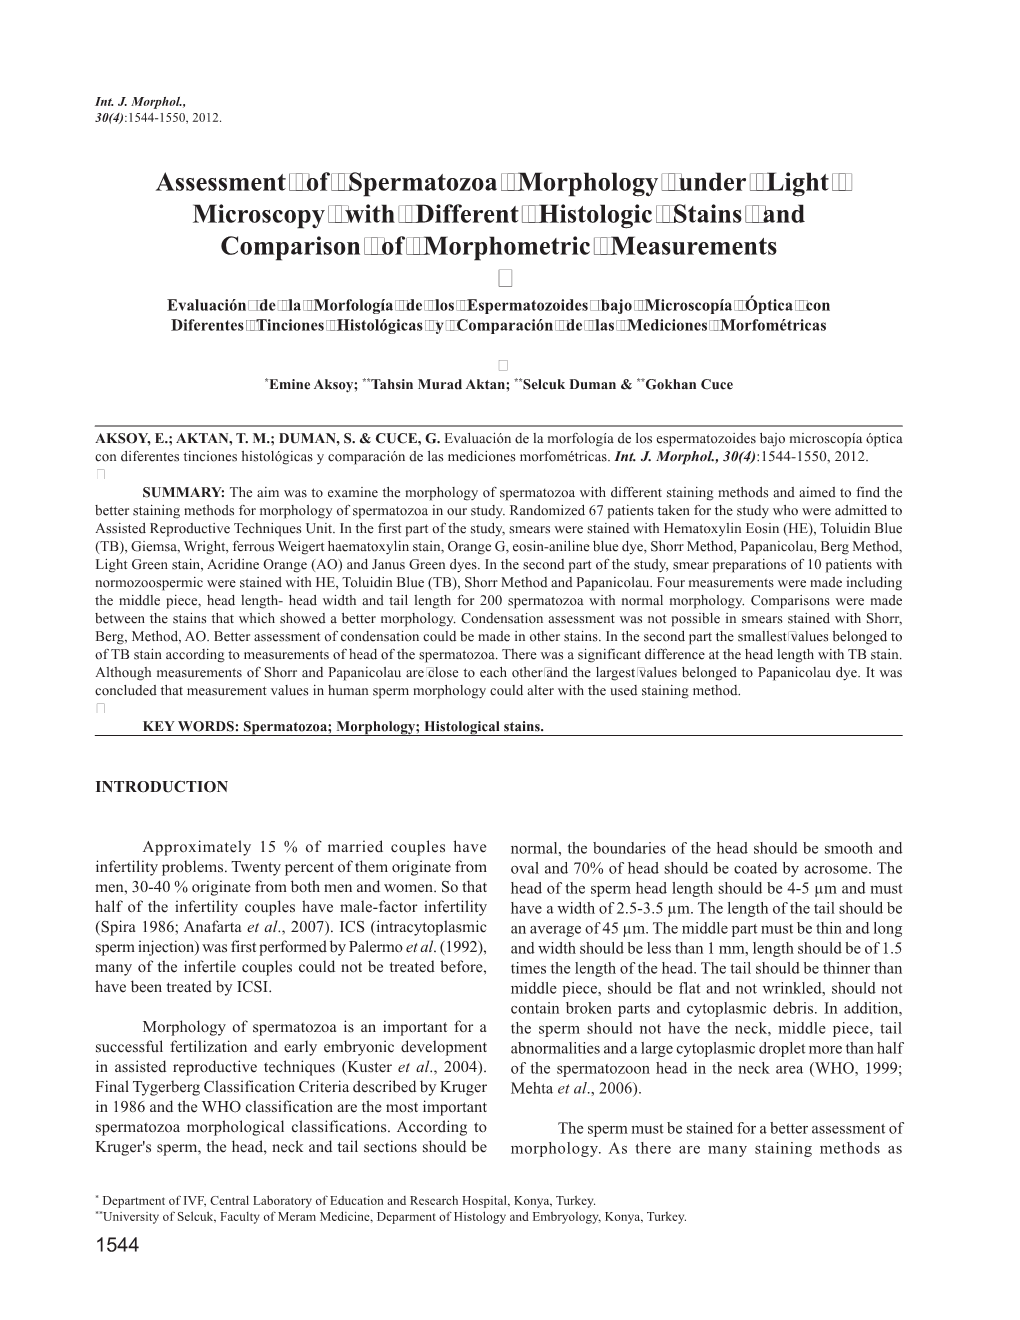 Assessment of Spermatozoa Morphology Under Light Microscopy with Different Histologic Stains and Comparison of Morphometric Measurements